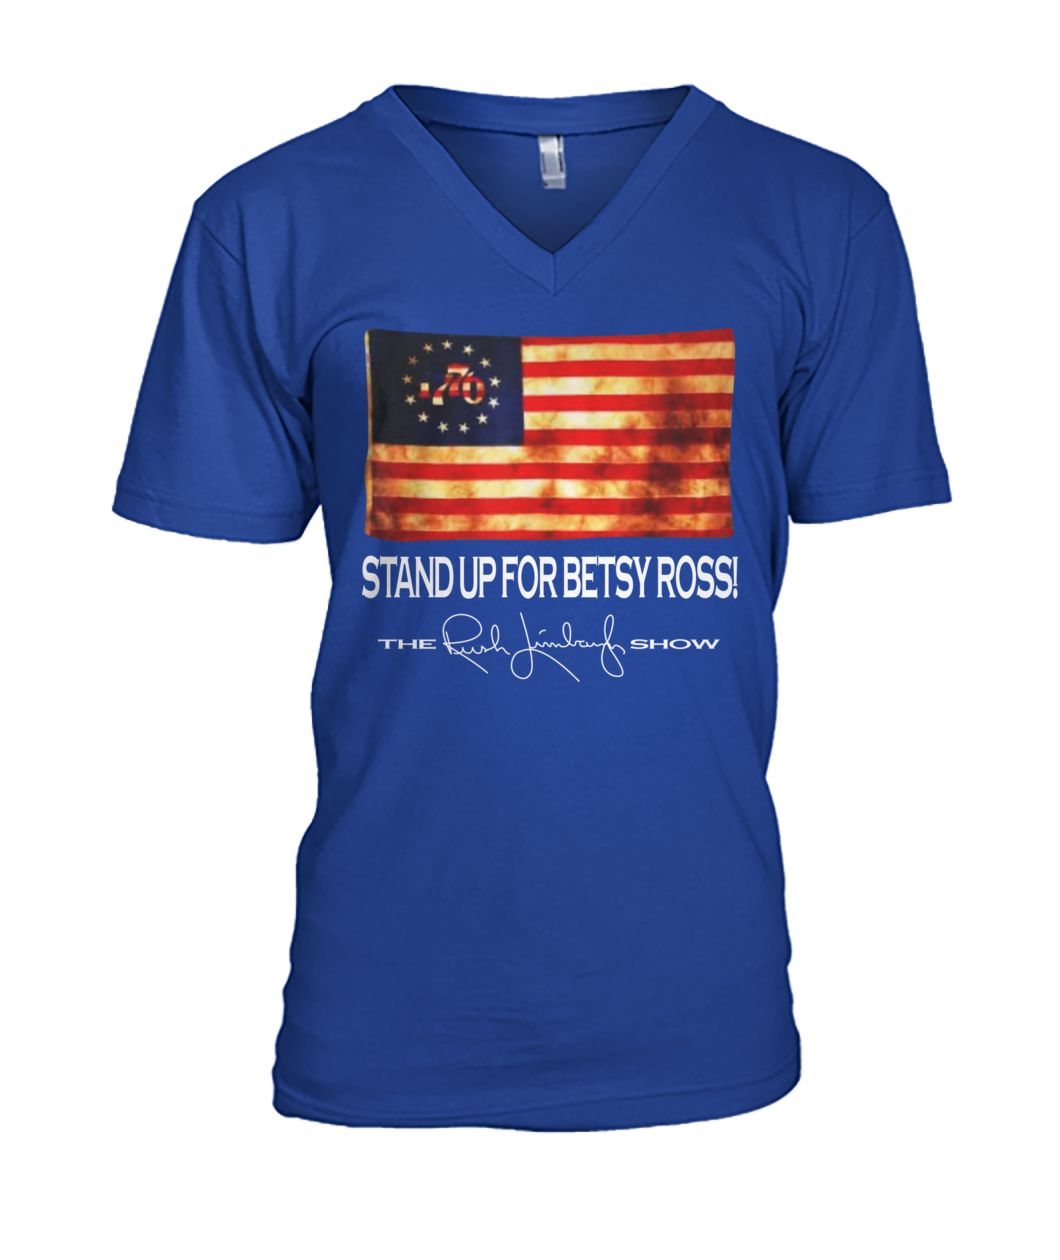 Stand up for betsy ross 1776 american flag mens v-neck